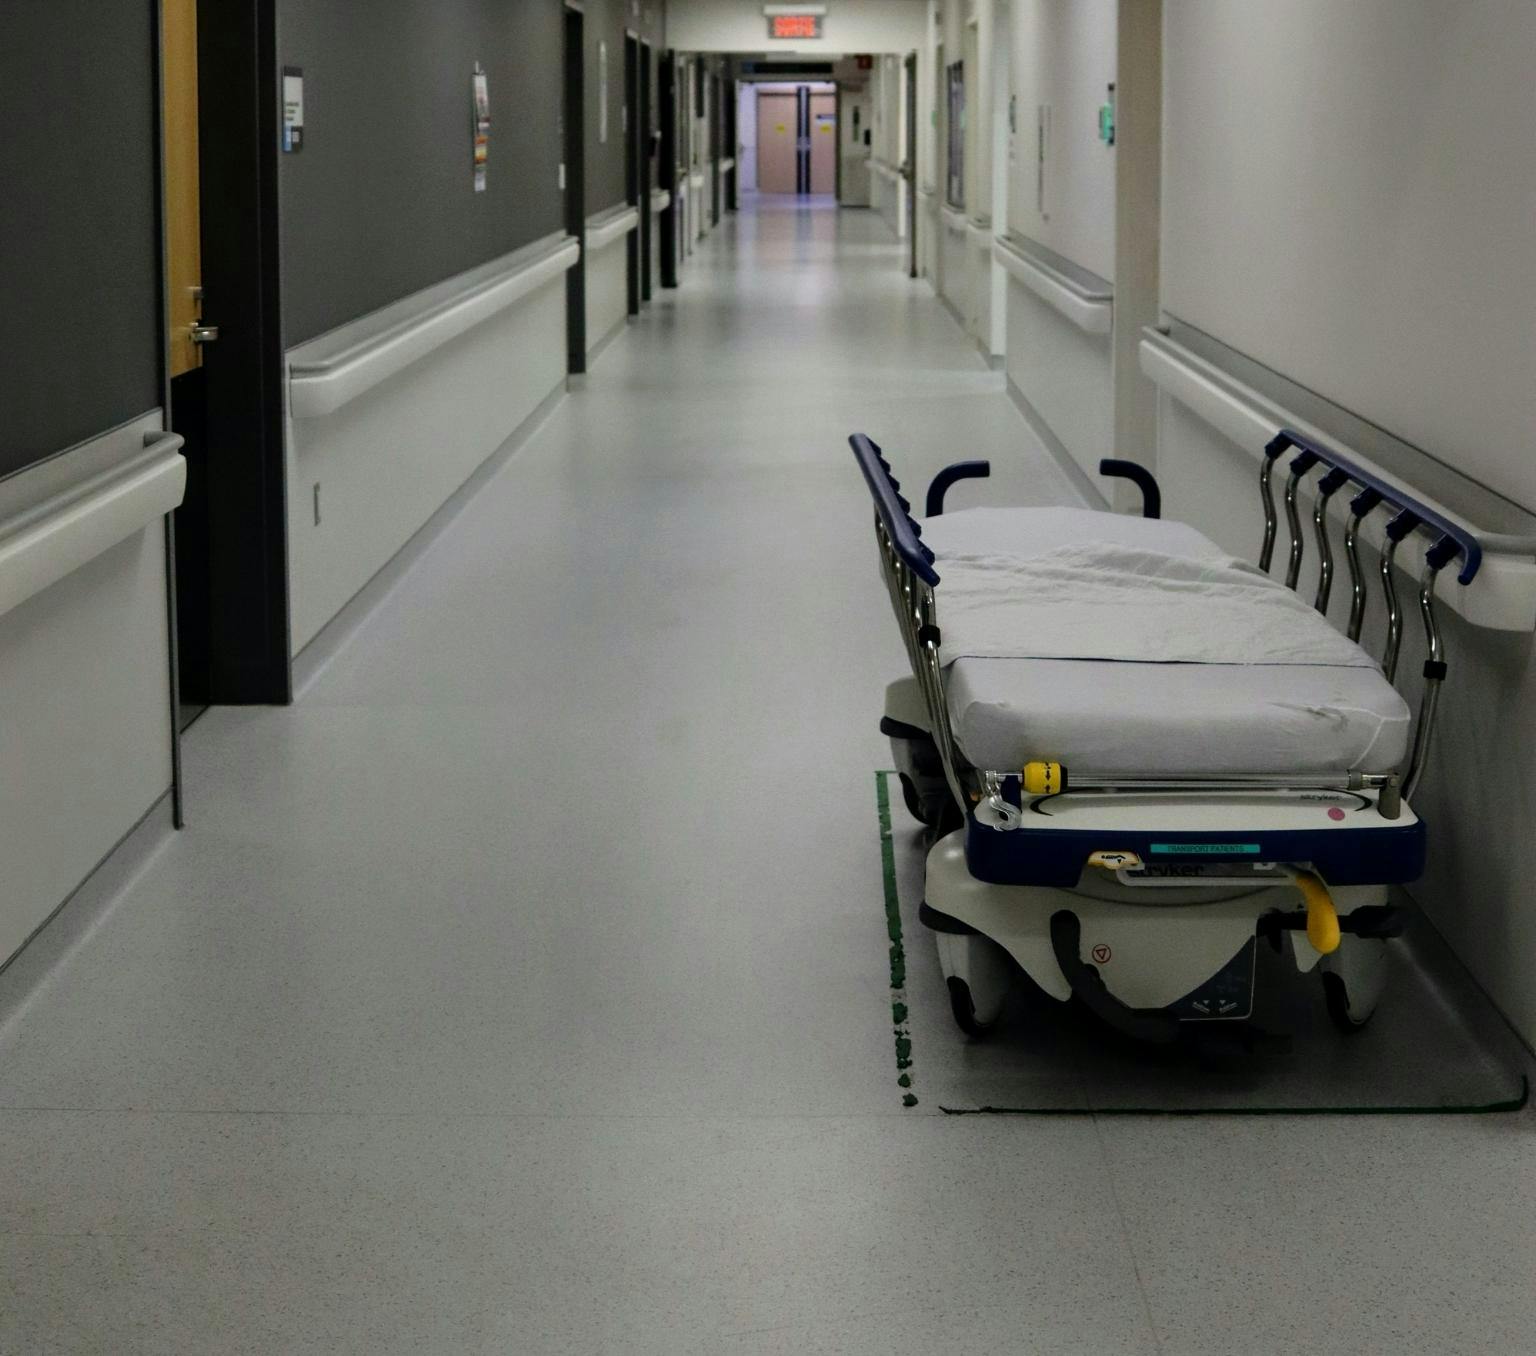 empty hospital corridor with a patient bed in the foreground